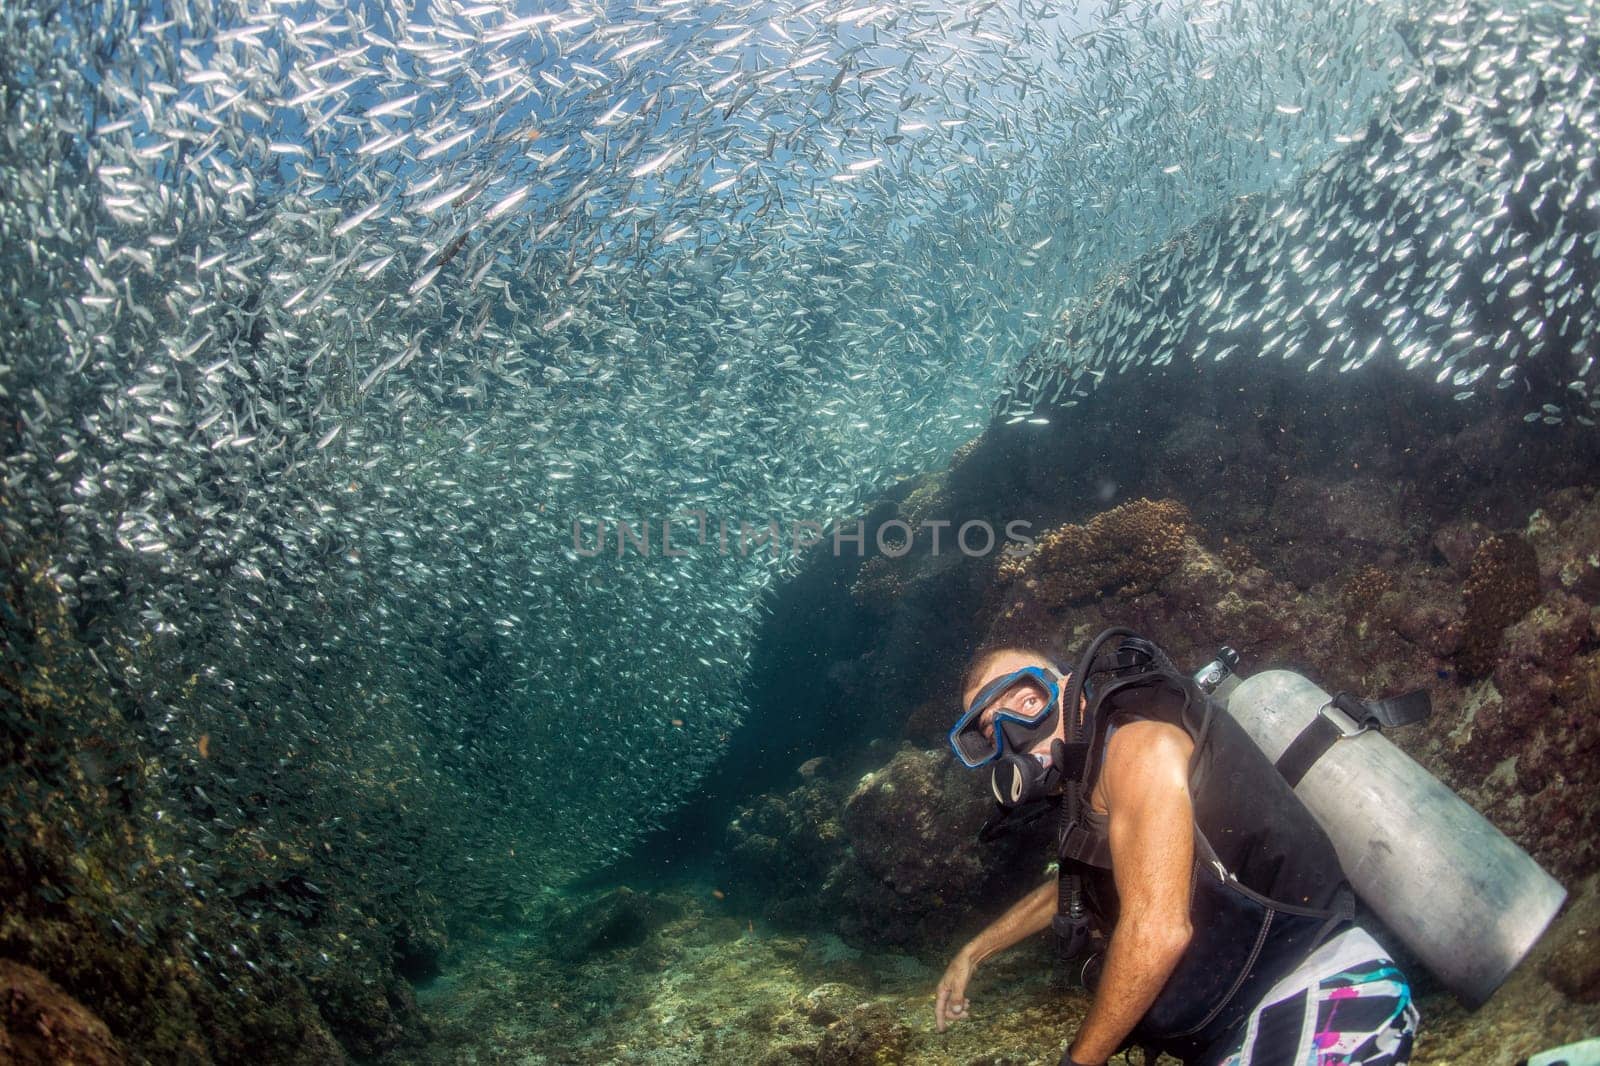 Scuba while going Inside a giant sardines school of fish in the reef and blue sea